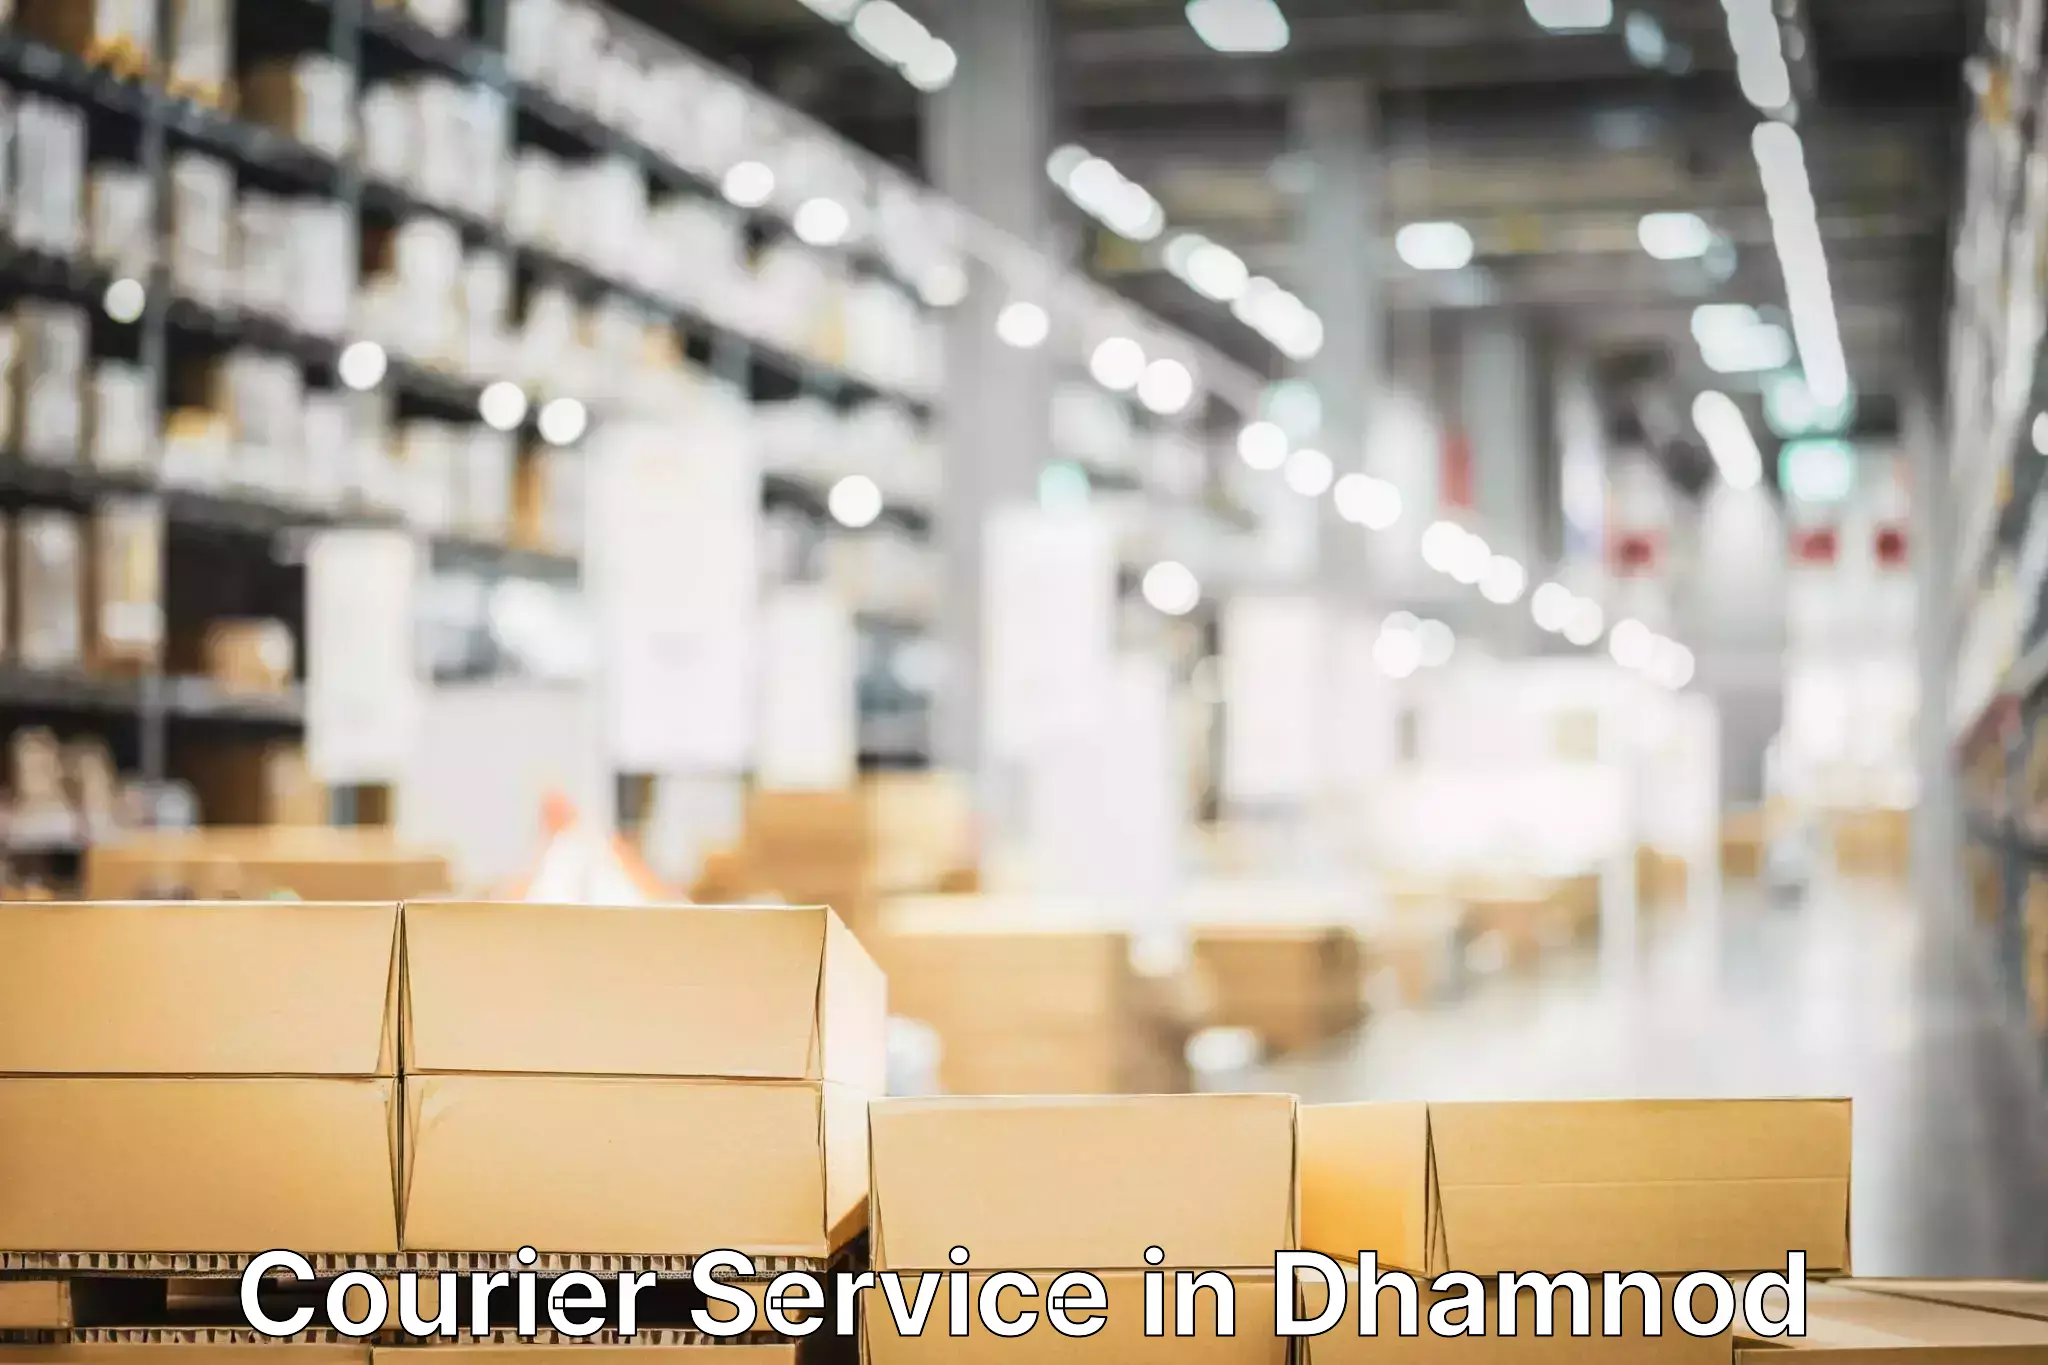 Budget-friendly shipping in Dhamnod